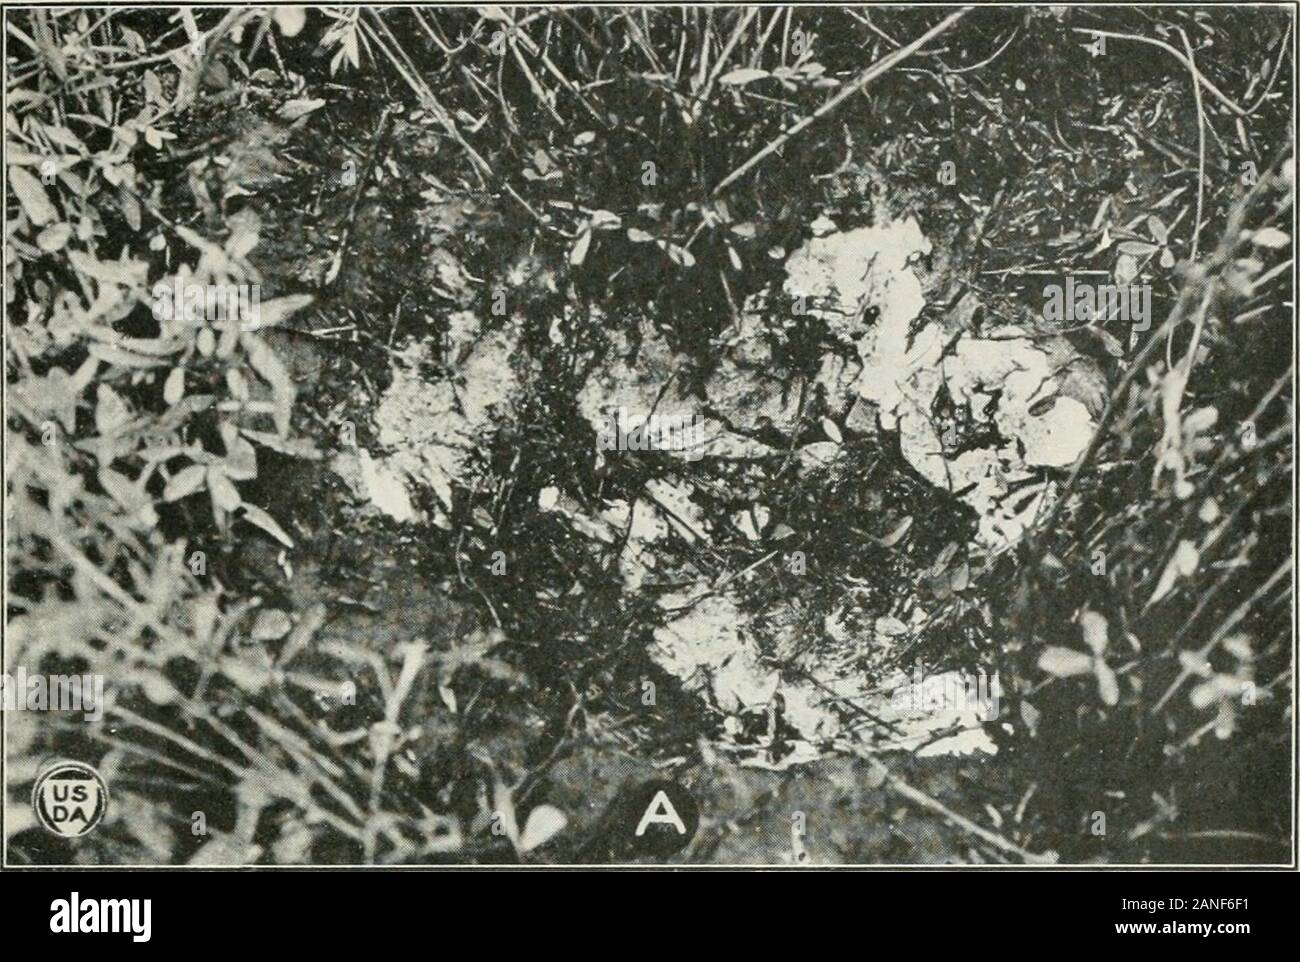 Journal of Agricultural Research . D, C. S. 1919. COTTON ROOTROT SPOTS. In JouT. AgT. Research, v. 18, p. 305-310, 7 fig- 7) Shantz, H. L., and Piemeisel, R. L. 1917. FUNGUS FAIRY RINGS IN EASTERN COLORADO AND THEIR EFFECT ON VEGE- TATION. In Jour. Agr. Research, v. 11, p. 191-246, 15 fig., pi. 10-30.Literature cited, p. 242-245. 8) Shear, Cornelius Lott. 1907. NEW SPECIES OF FUNGI. In Bul. Torrey Bot. Club, v. 34, p. 305-317. PLATE I A.—A conidial mat i day old. Still increasing its area by active growth on theperiphery where the pronounced white color is shown. The stromatic myceliumwhich sp Stock Photo